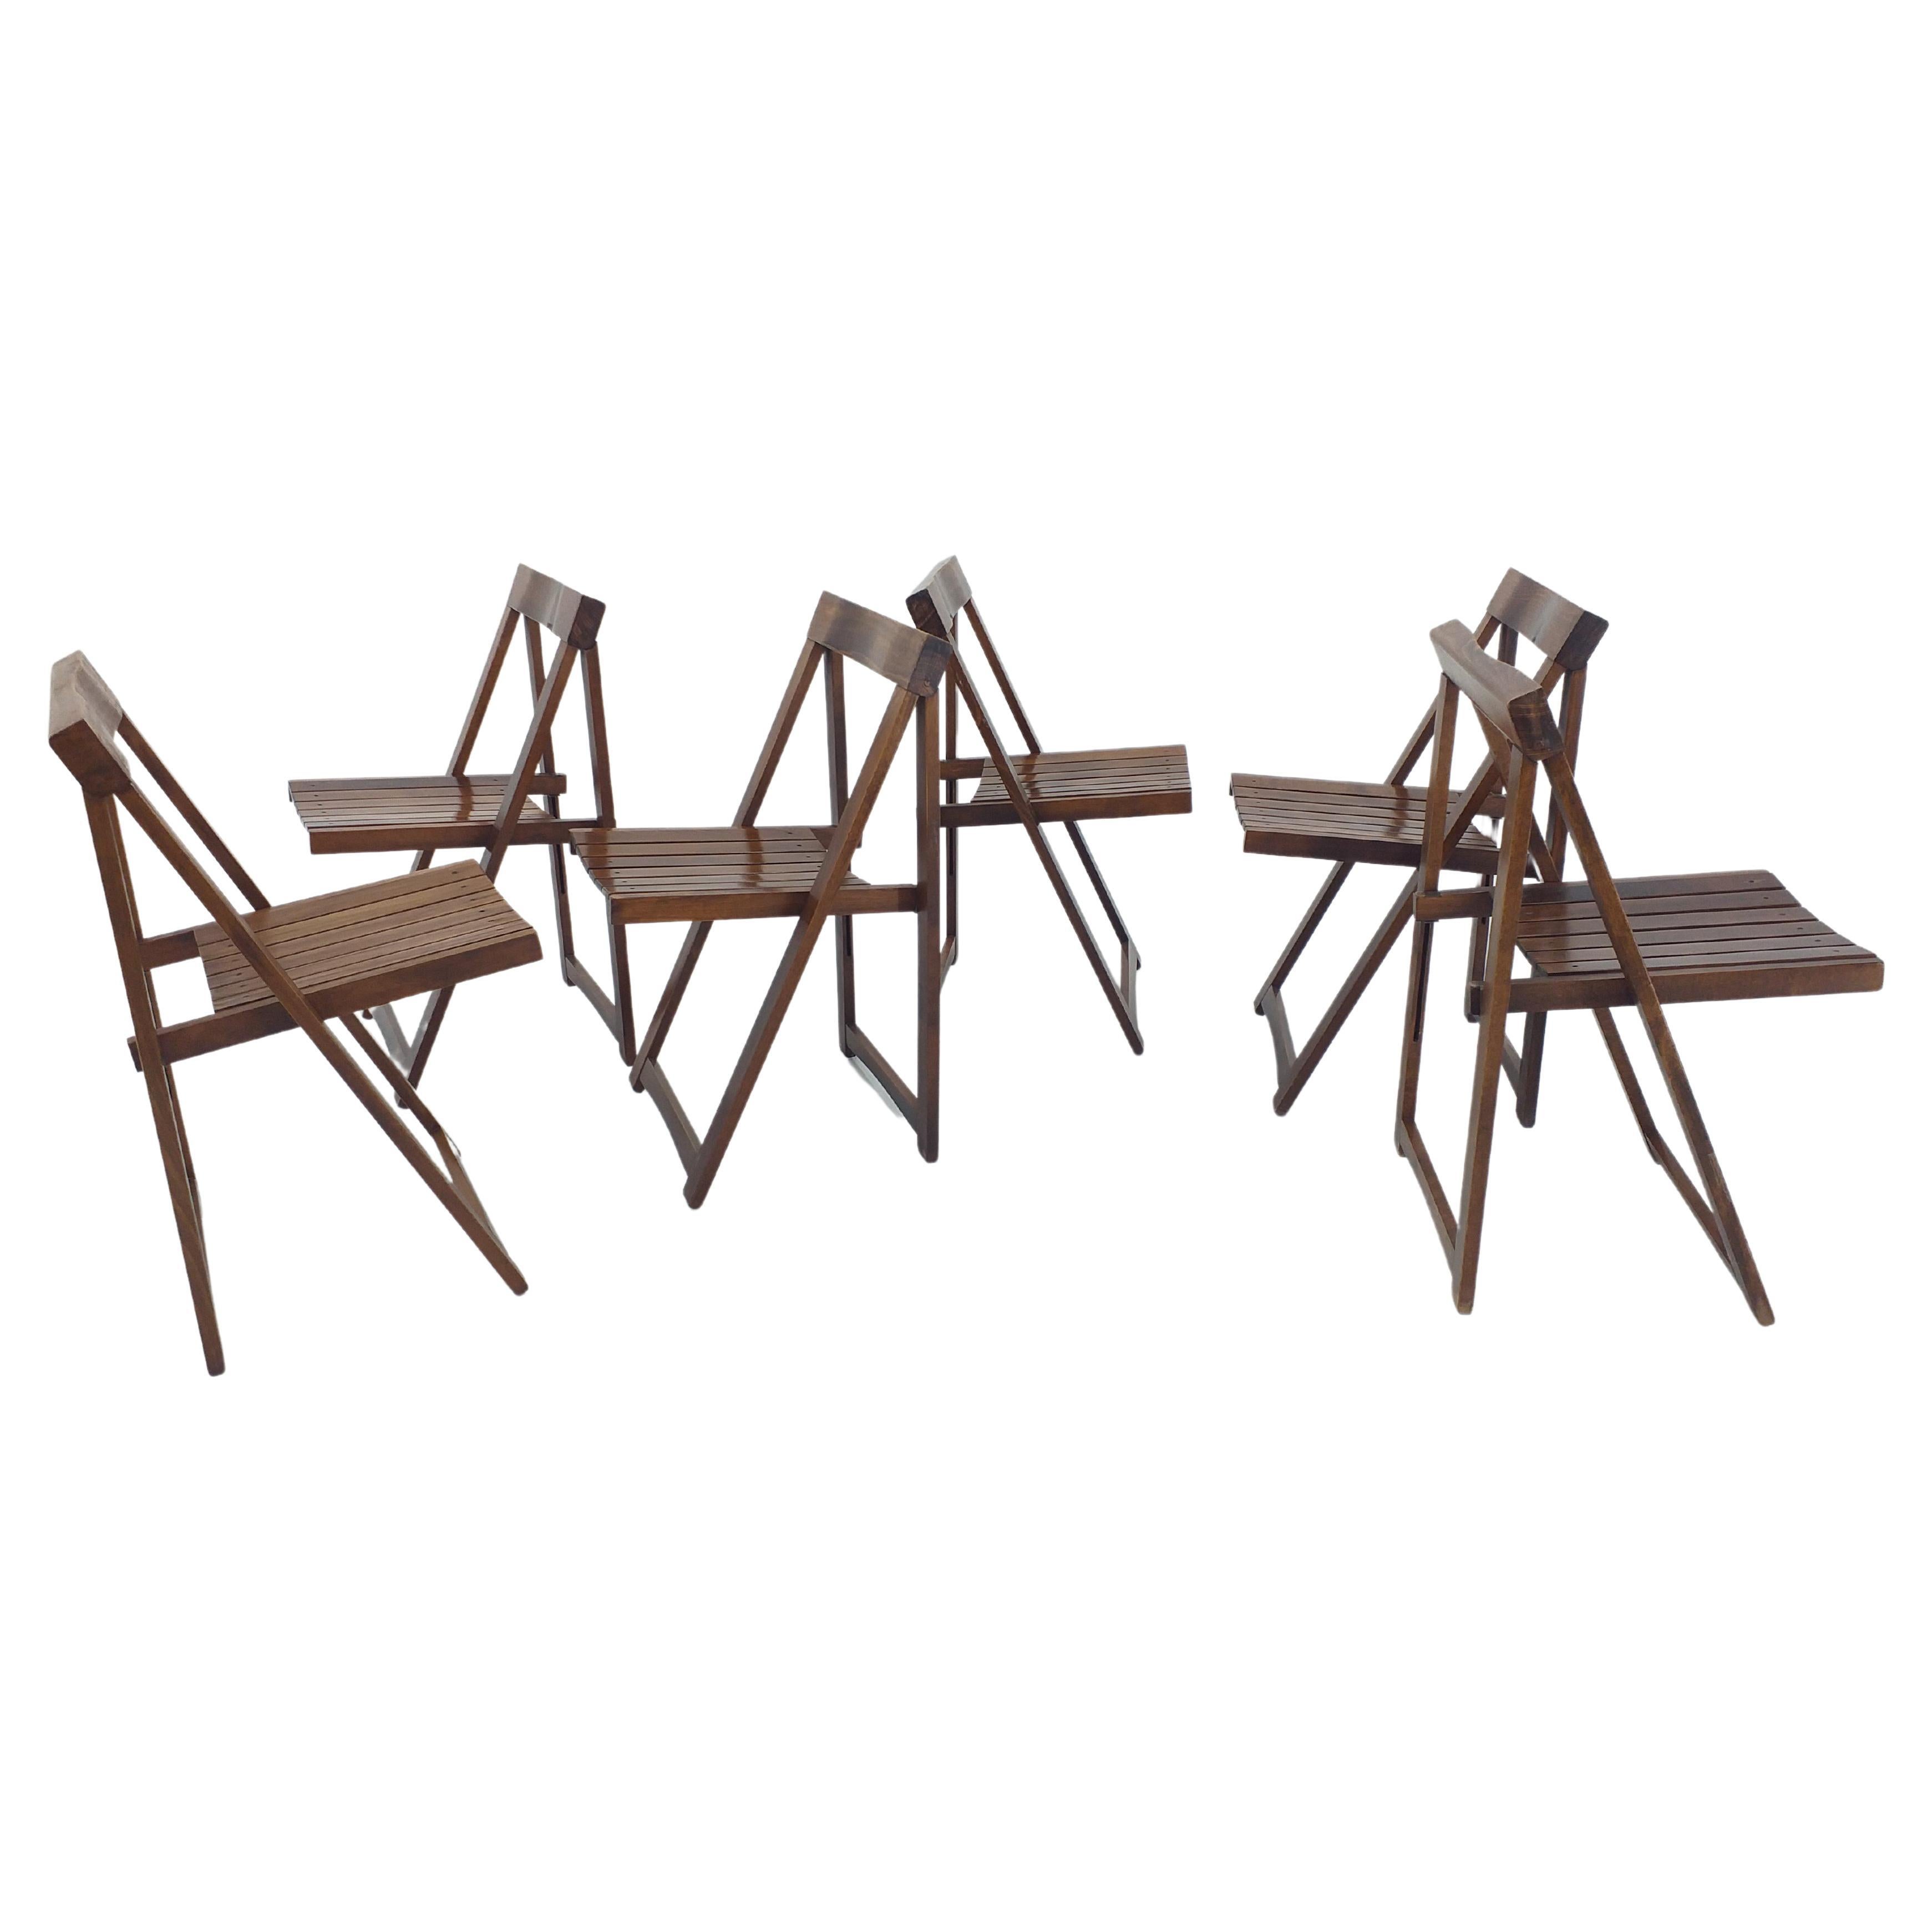 Set of Six Mid Century Folding Chairs Aldo Jacober for Alberto Bazzani, 1960s For Sale